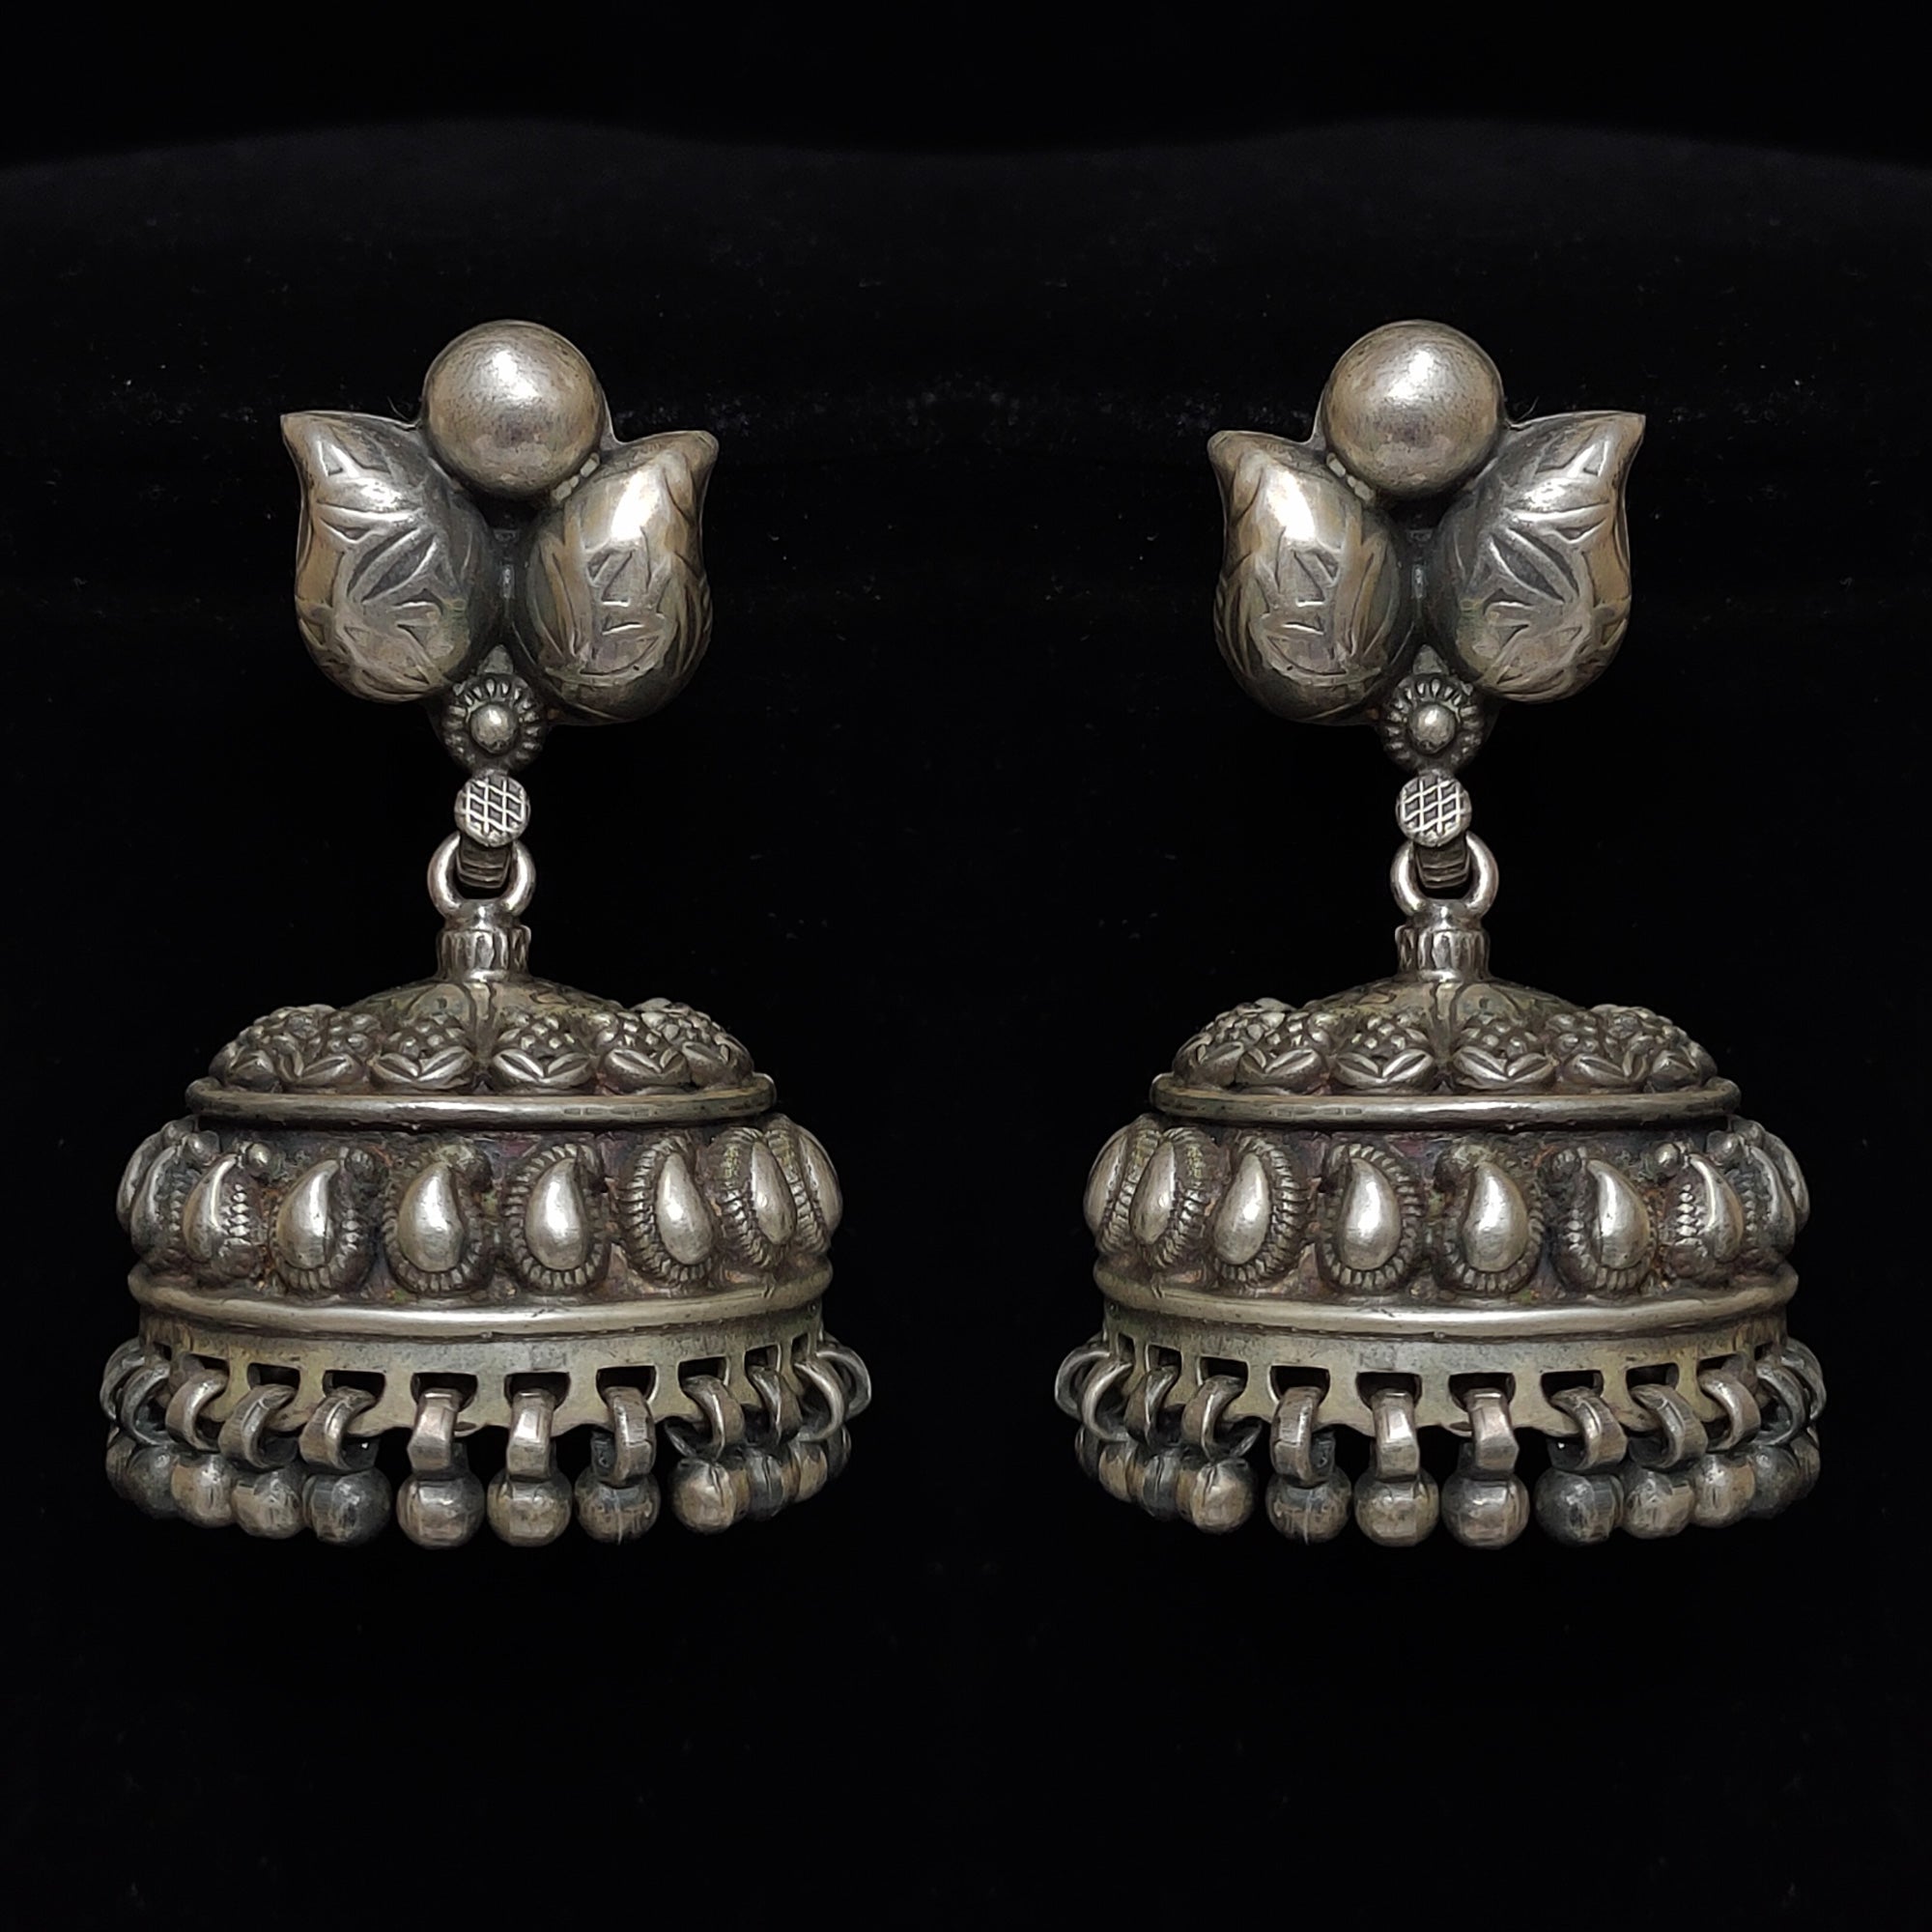 Shop Oxidised Jewellery For Women Online at Viraasi